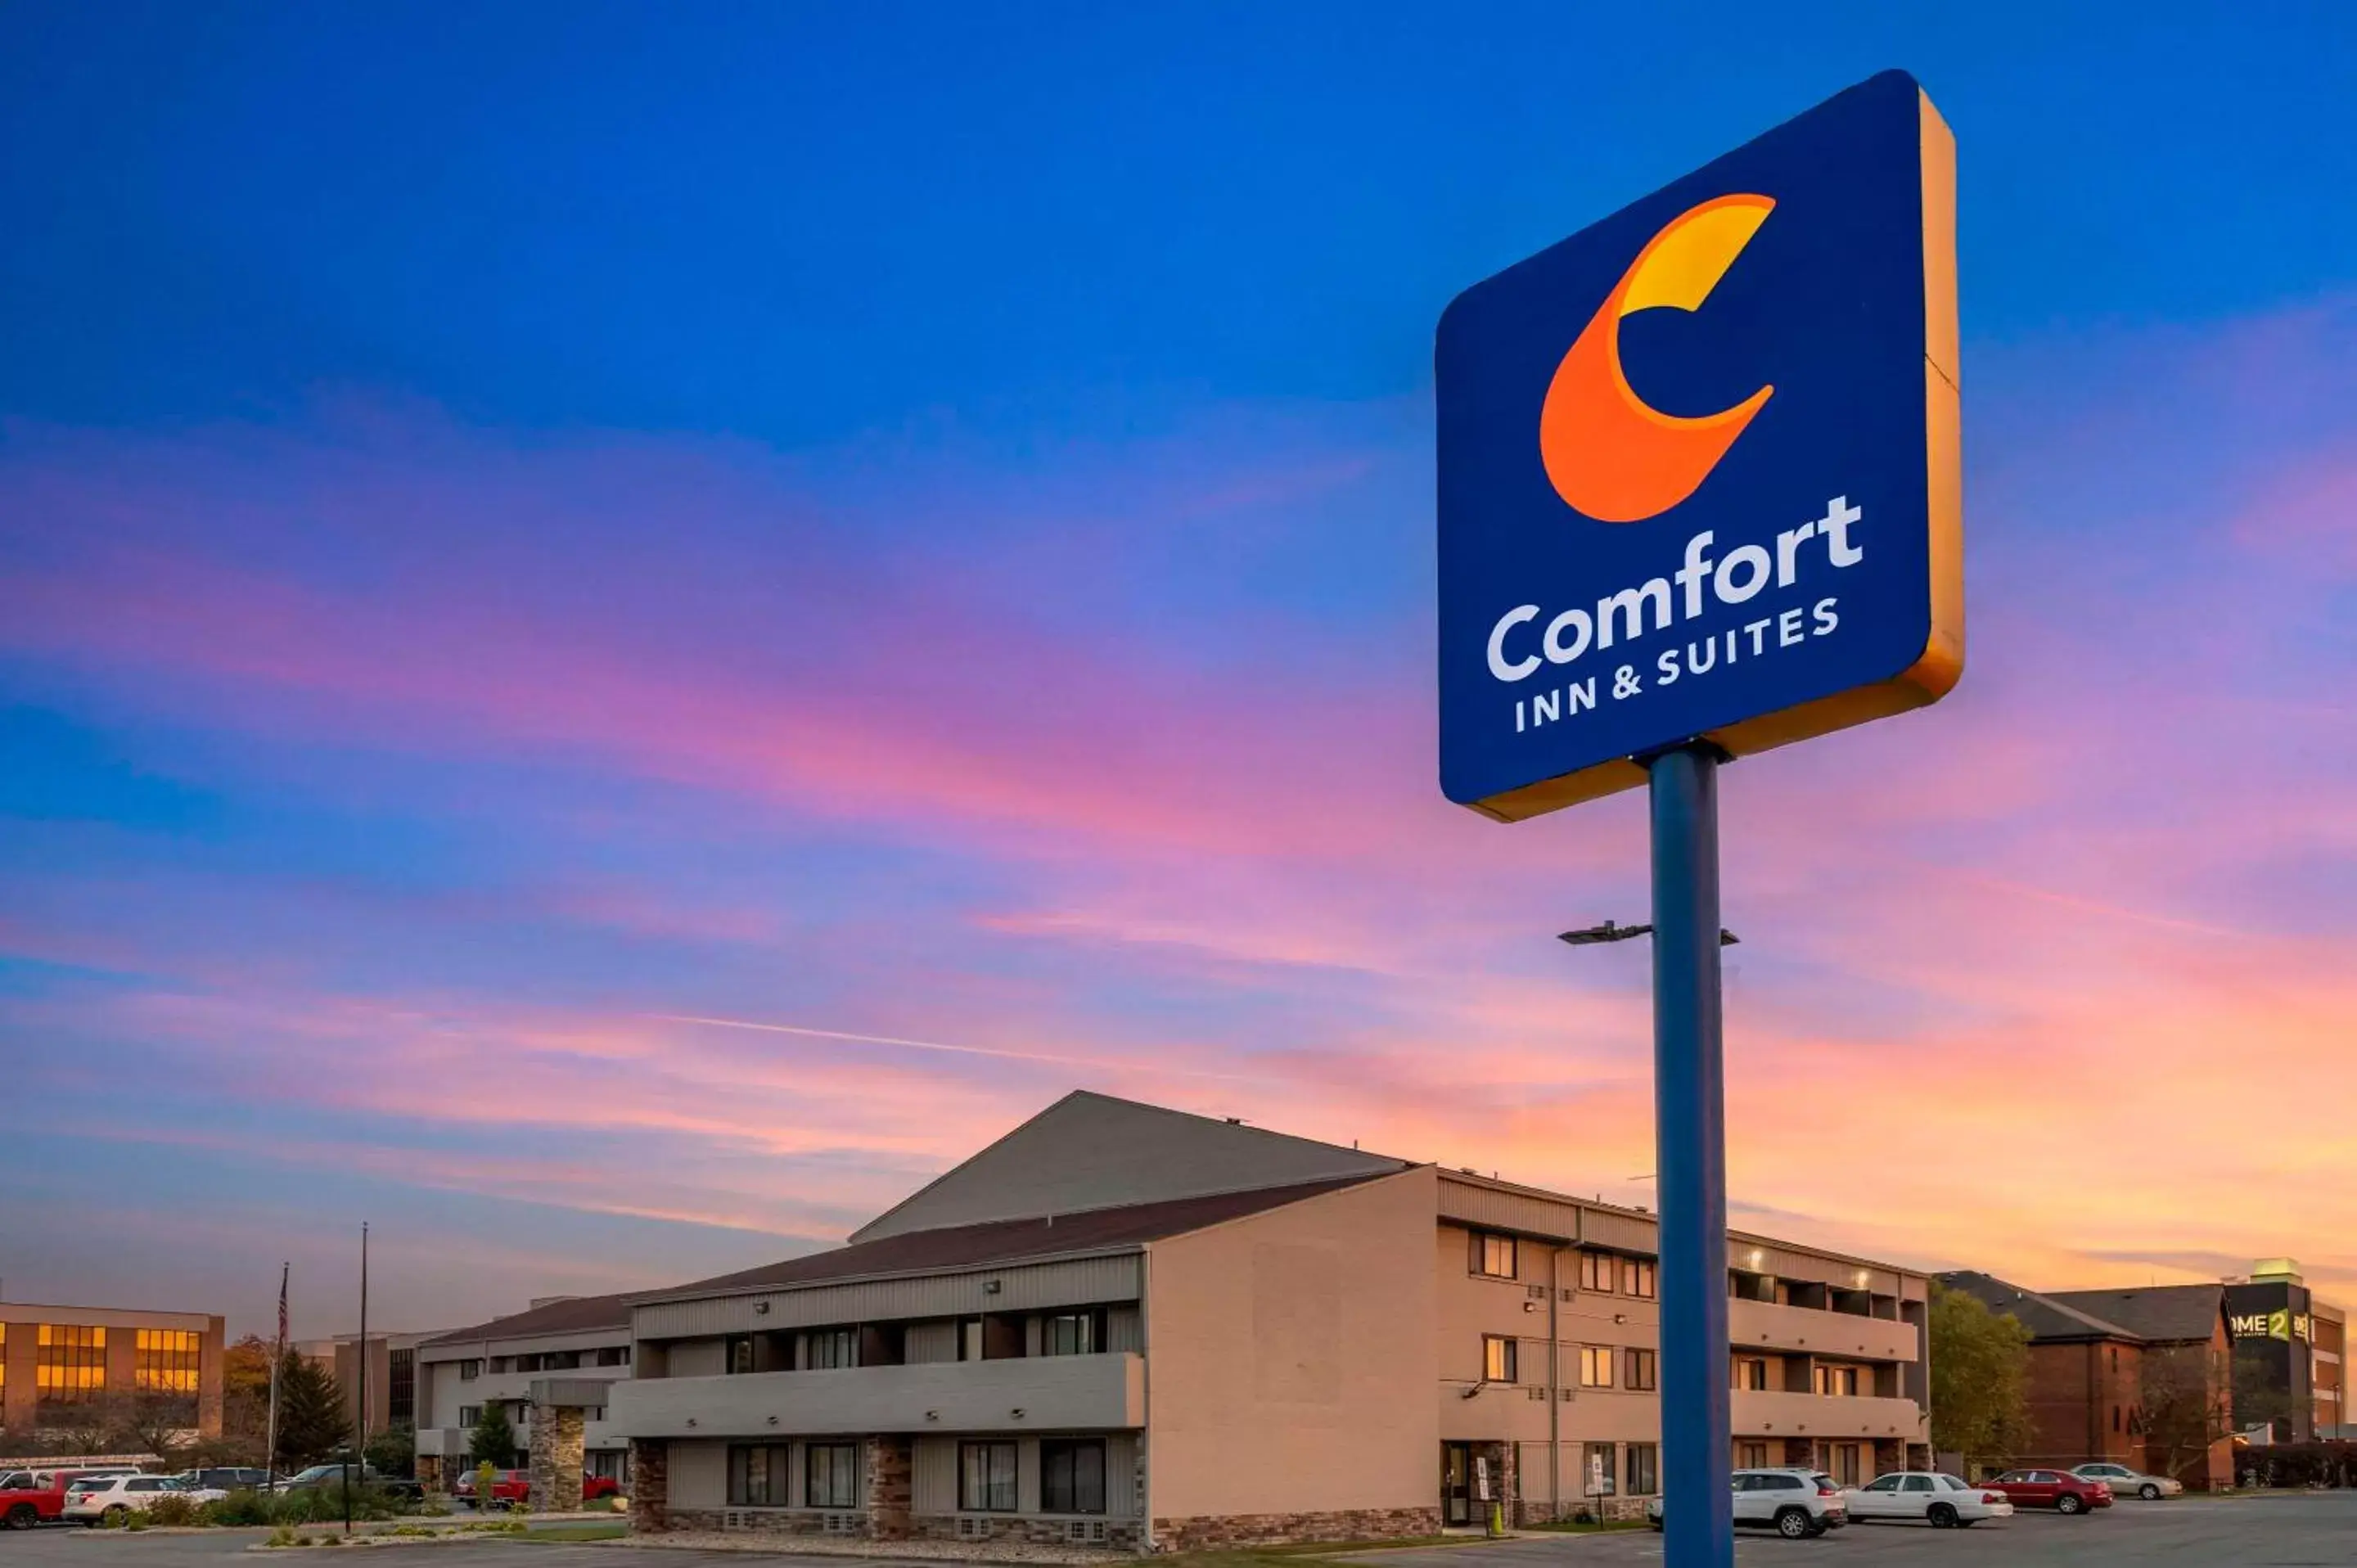 Property building in Comfort Inn & Suites North at the Pyramids